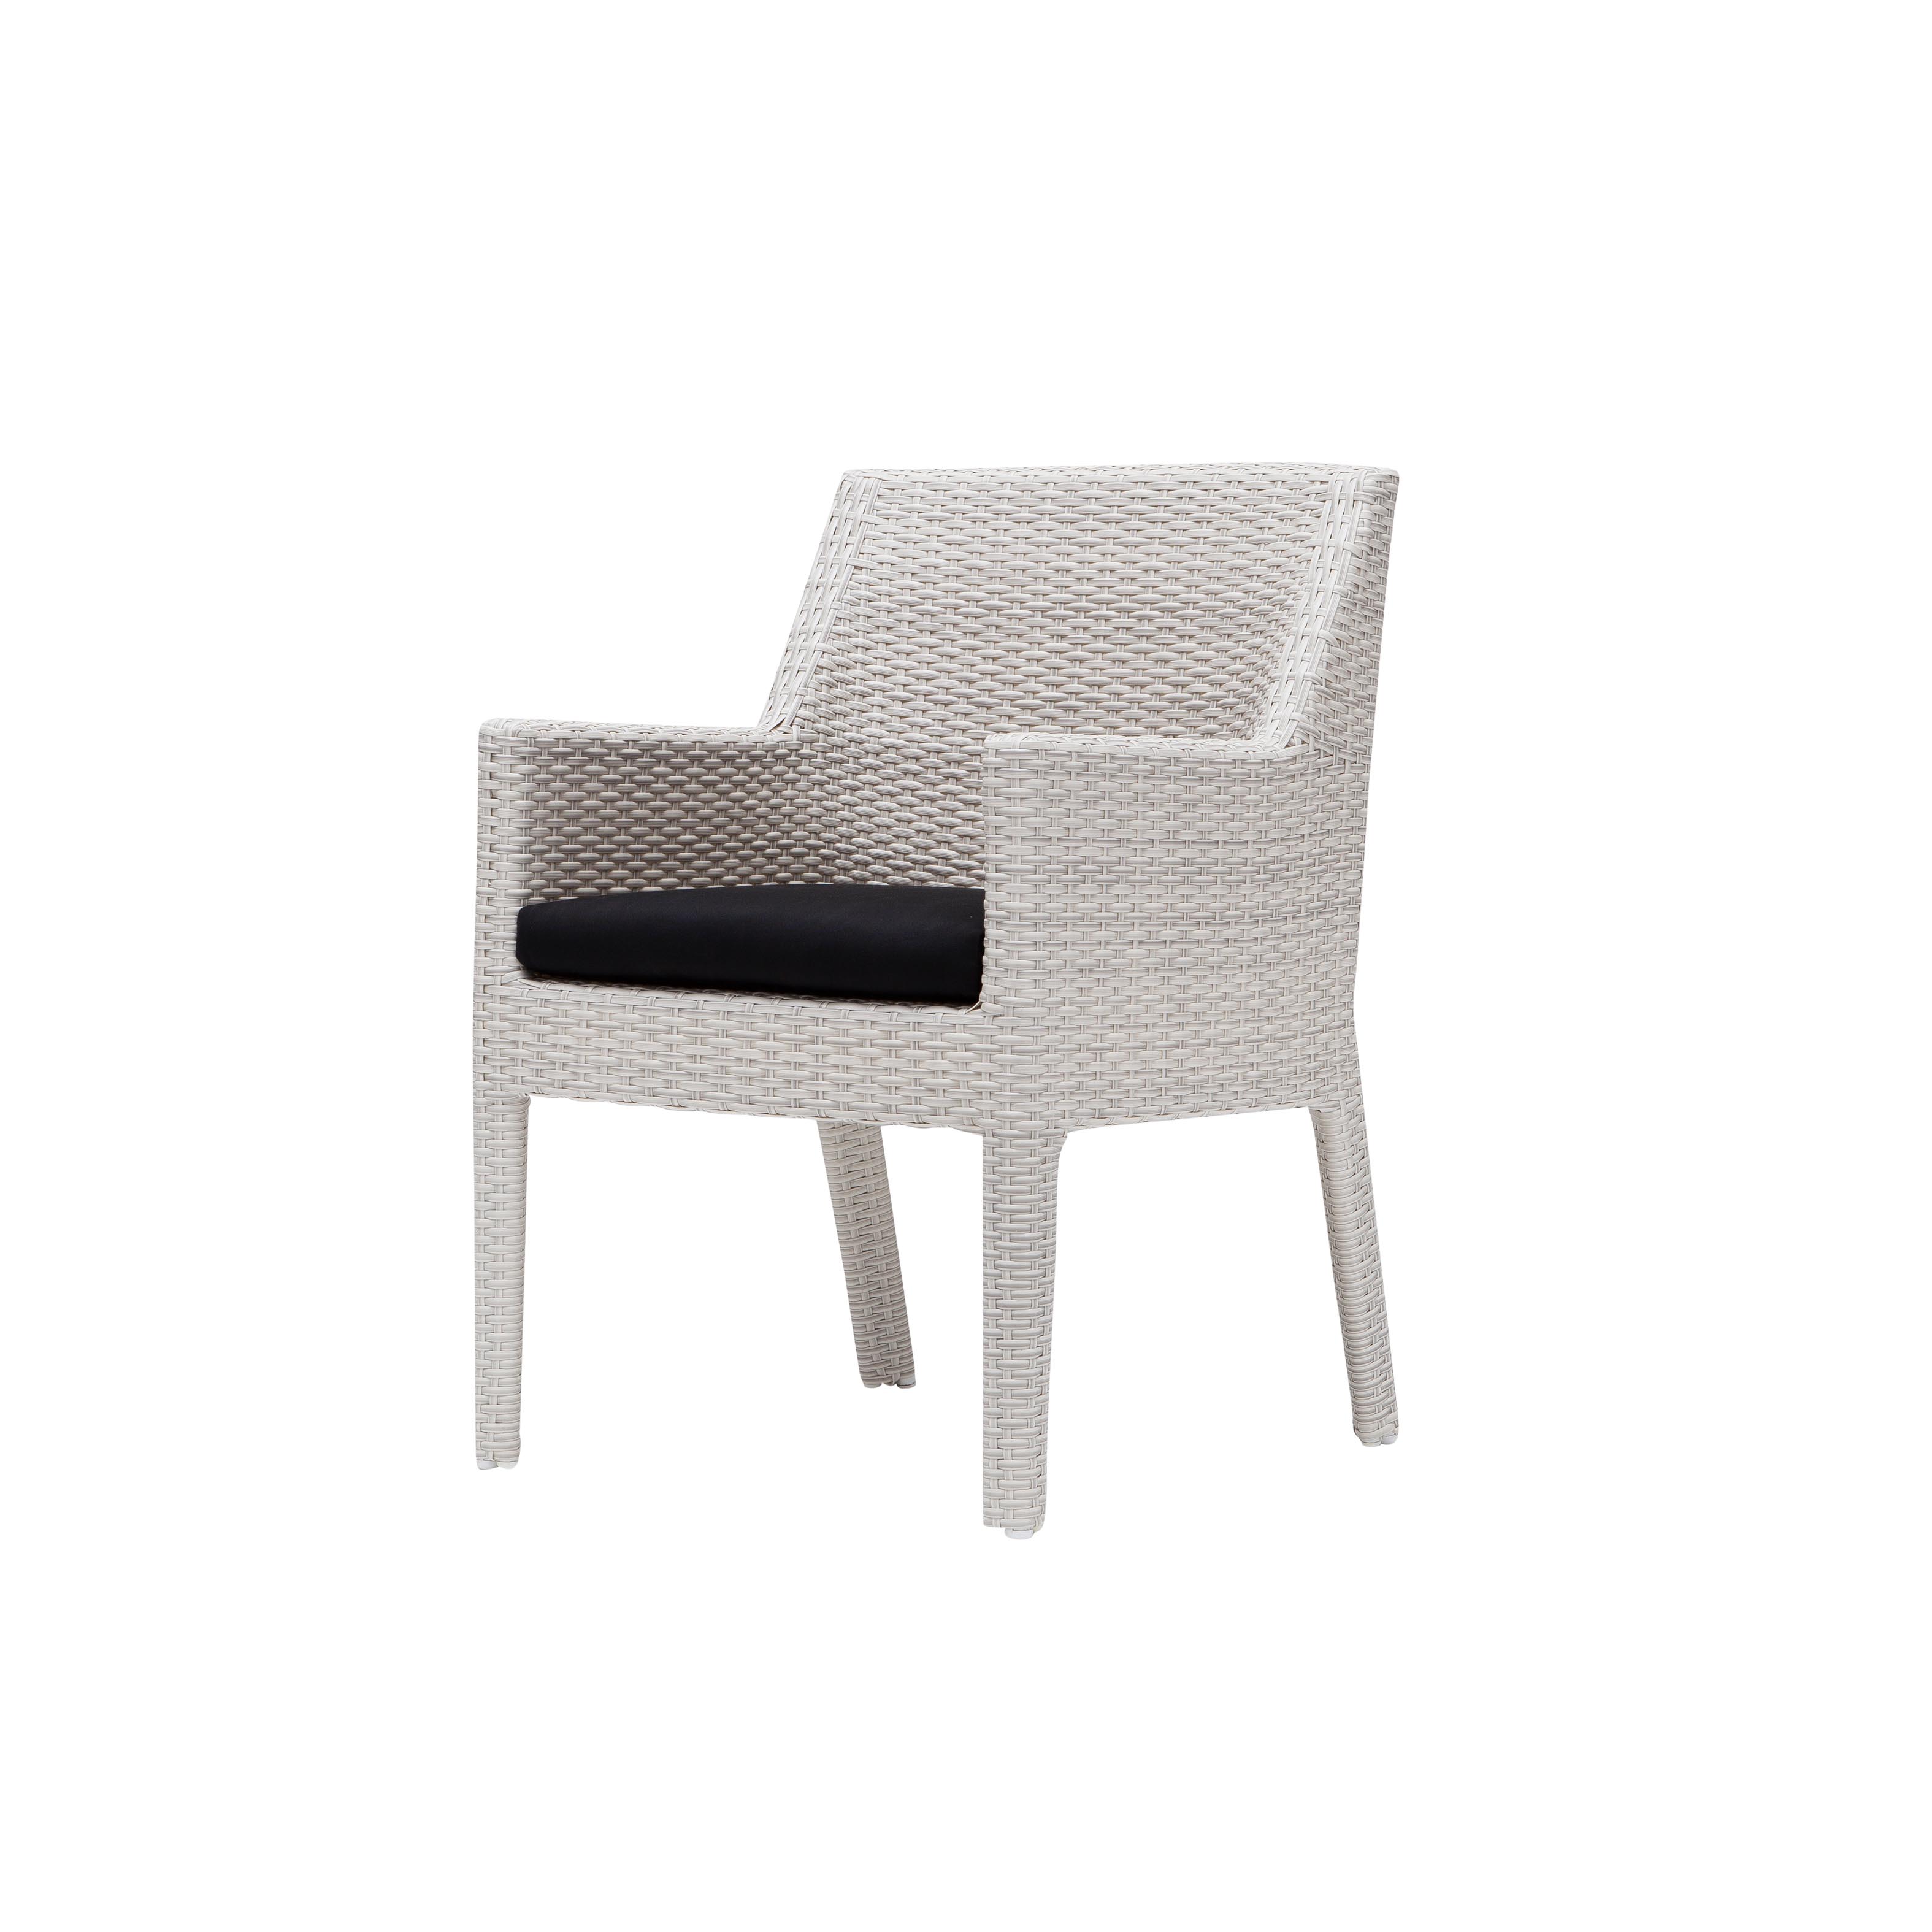 Nadia dining chair S1